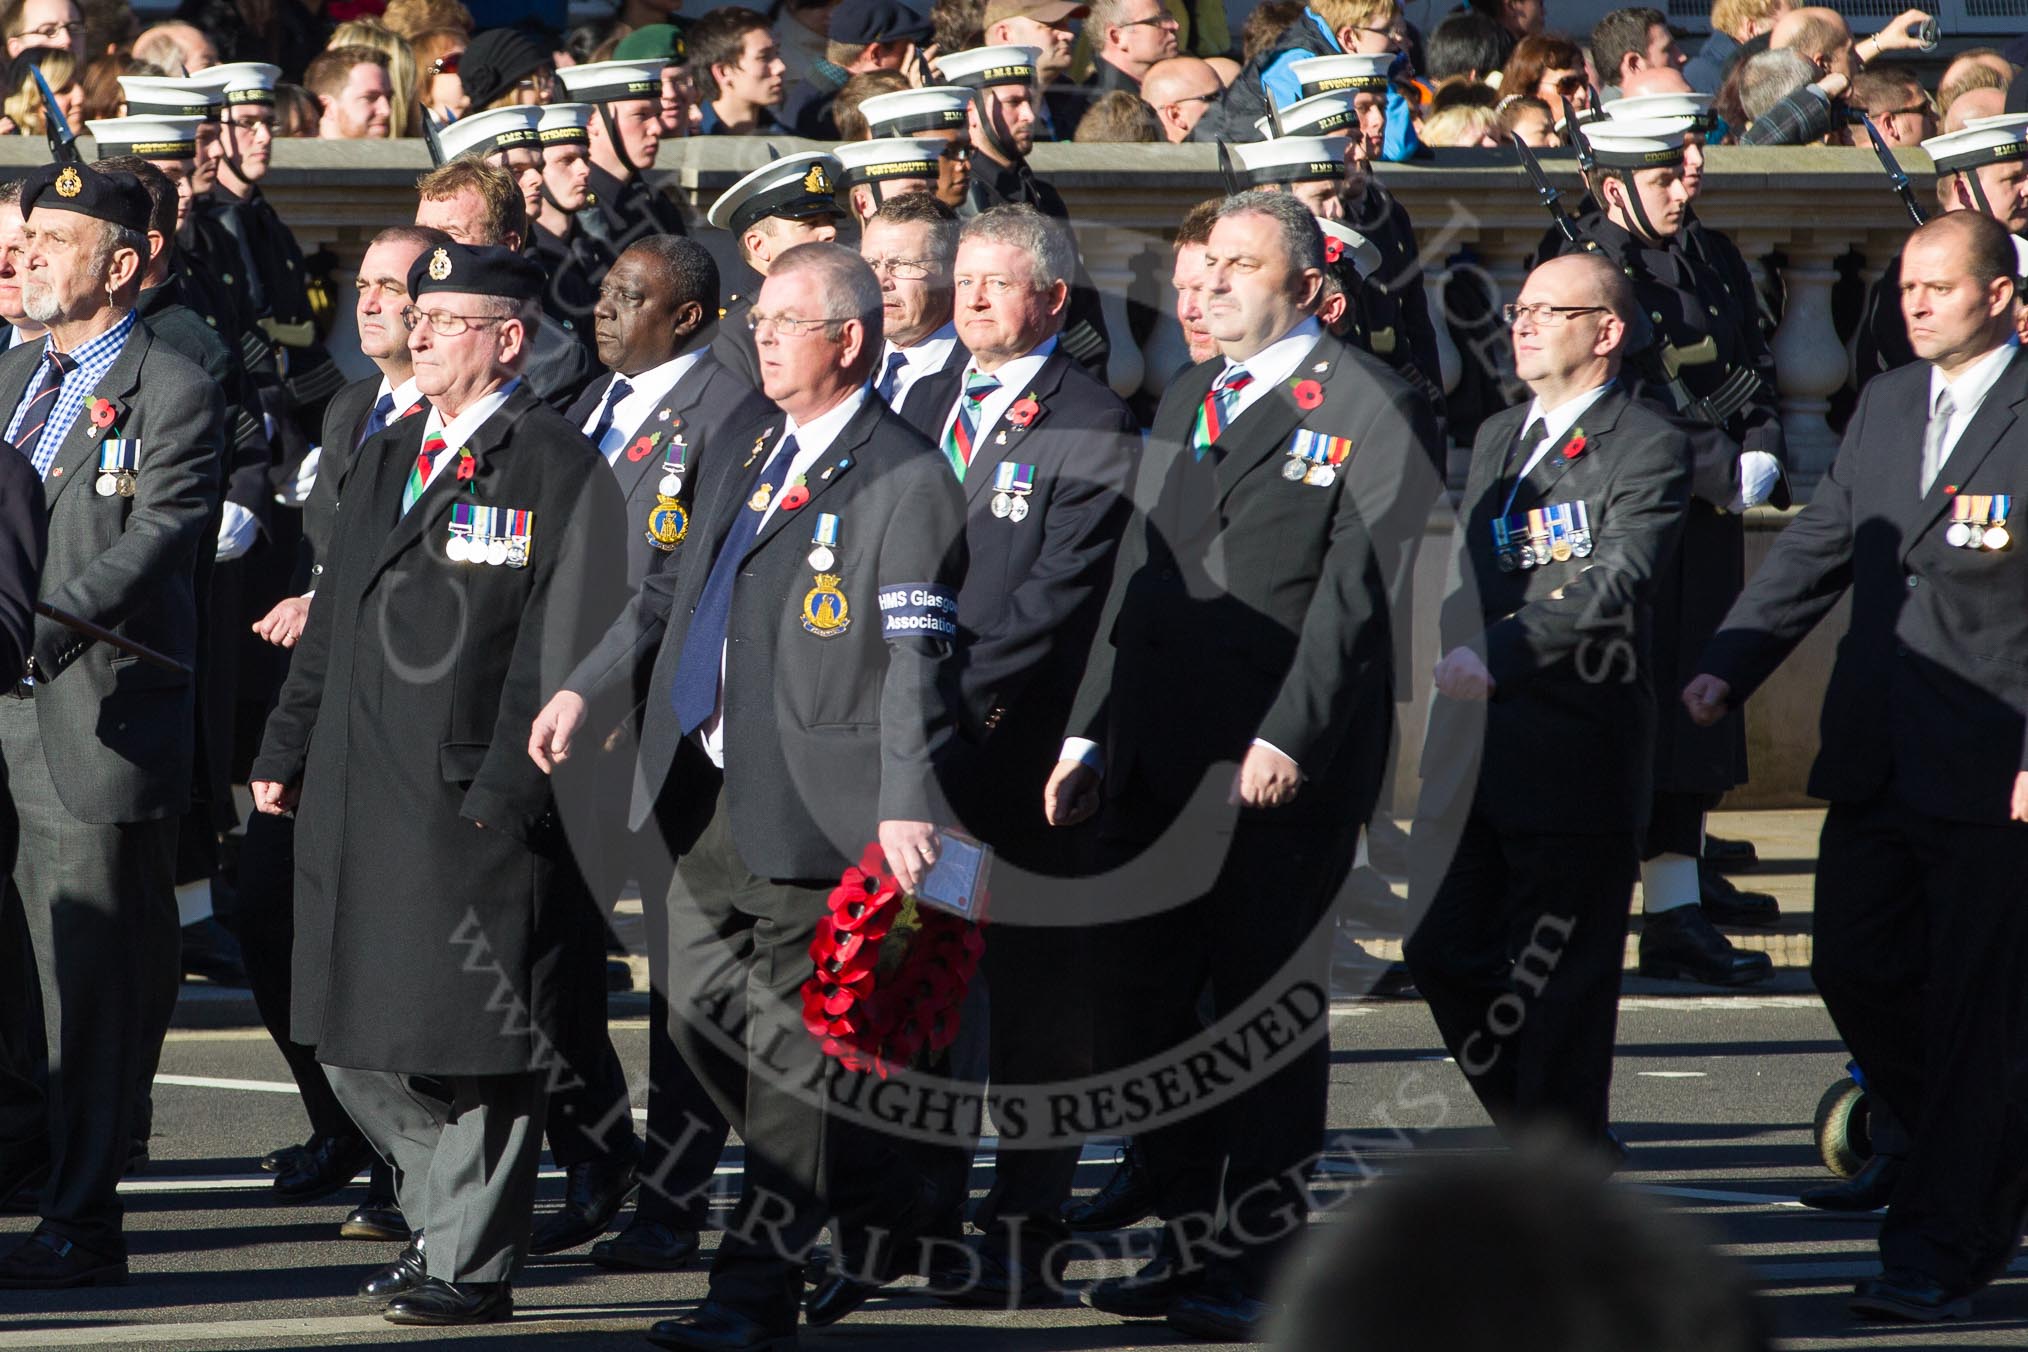 Remembrance Sunday 2012 Cenotaph March Past.
Whitehall, Cenotaph,
London SW1,

United Kingdom,
on 11 November 2012 at 11:40, image #155